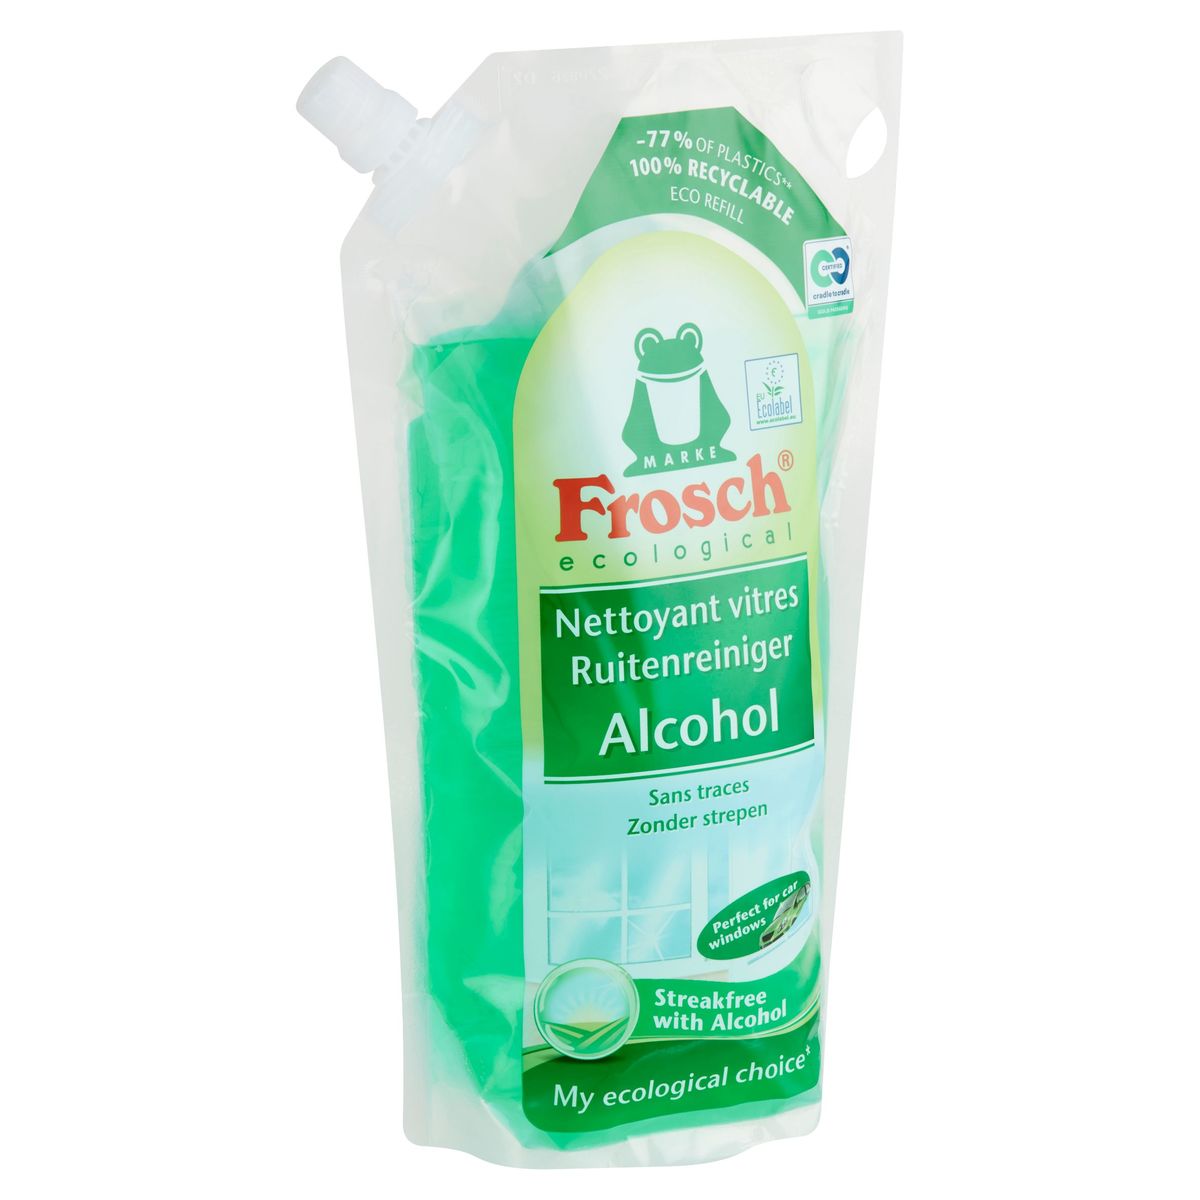 Frosch Ecological Nettoyant Vitres Alcohol 1000 ml